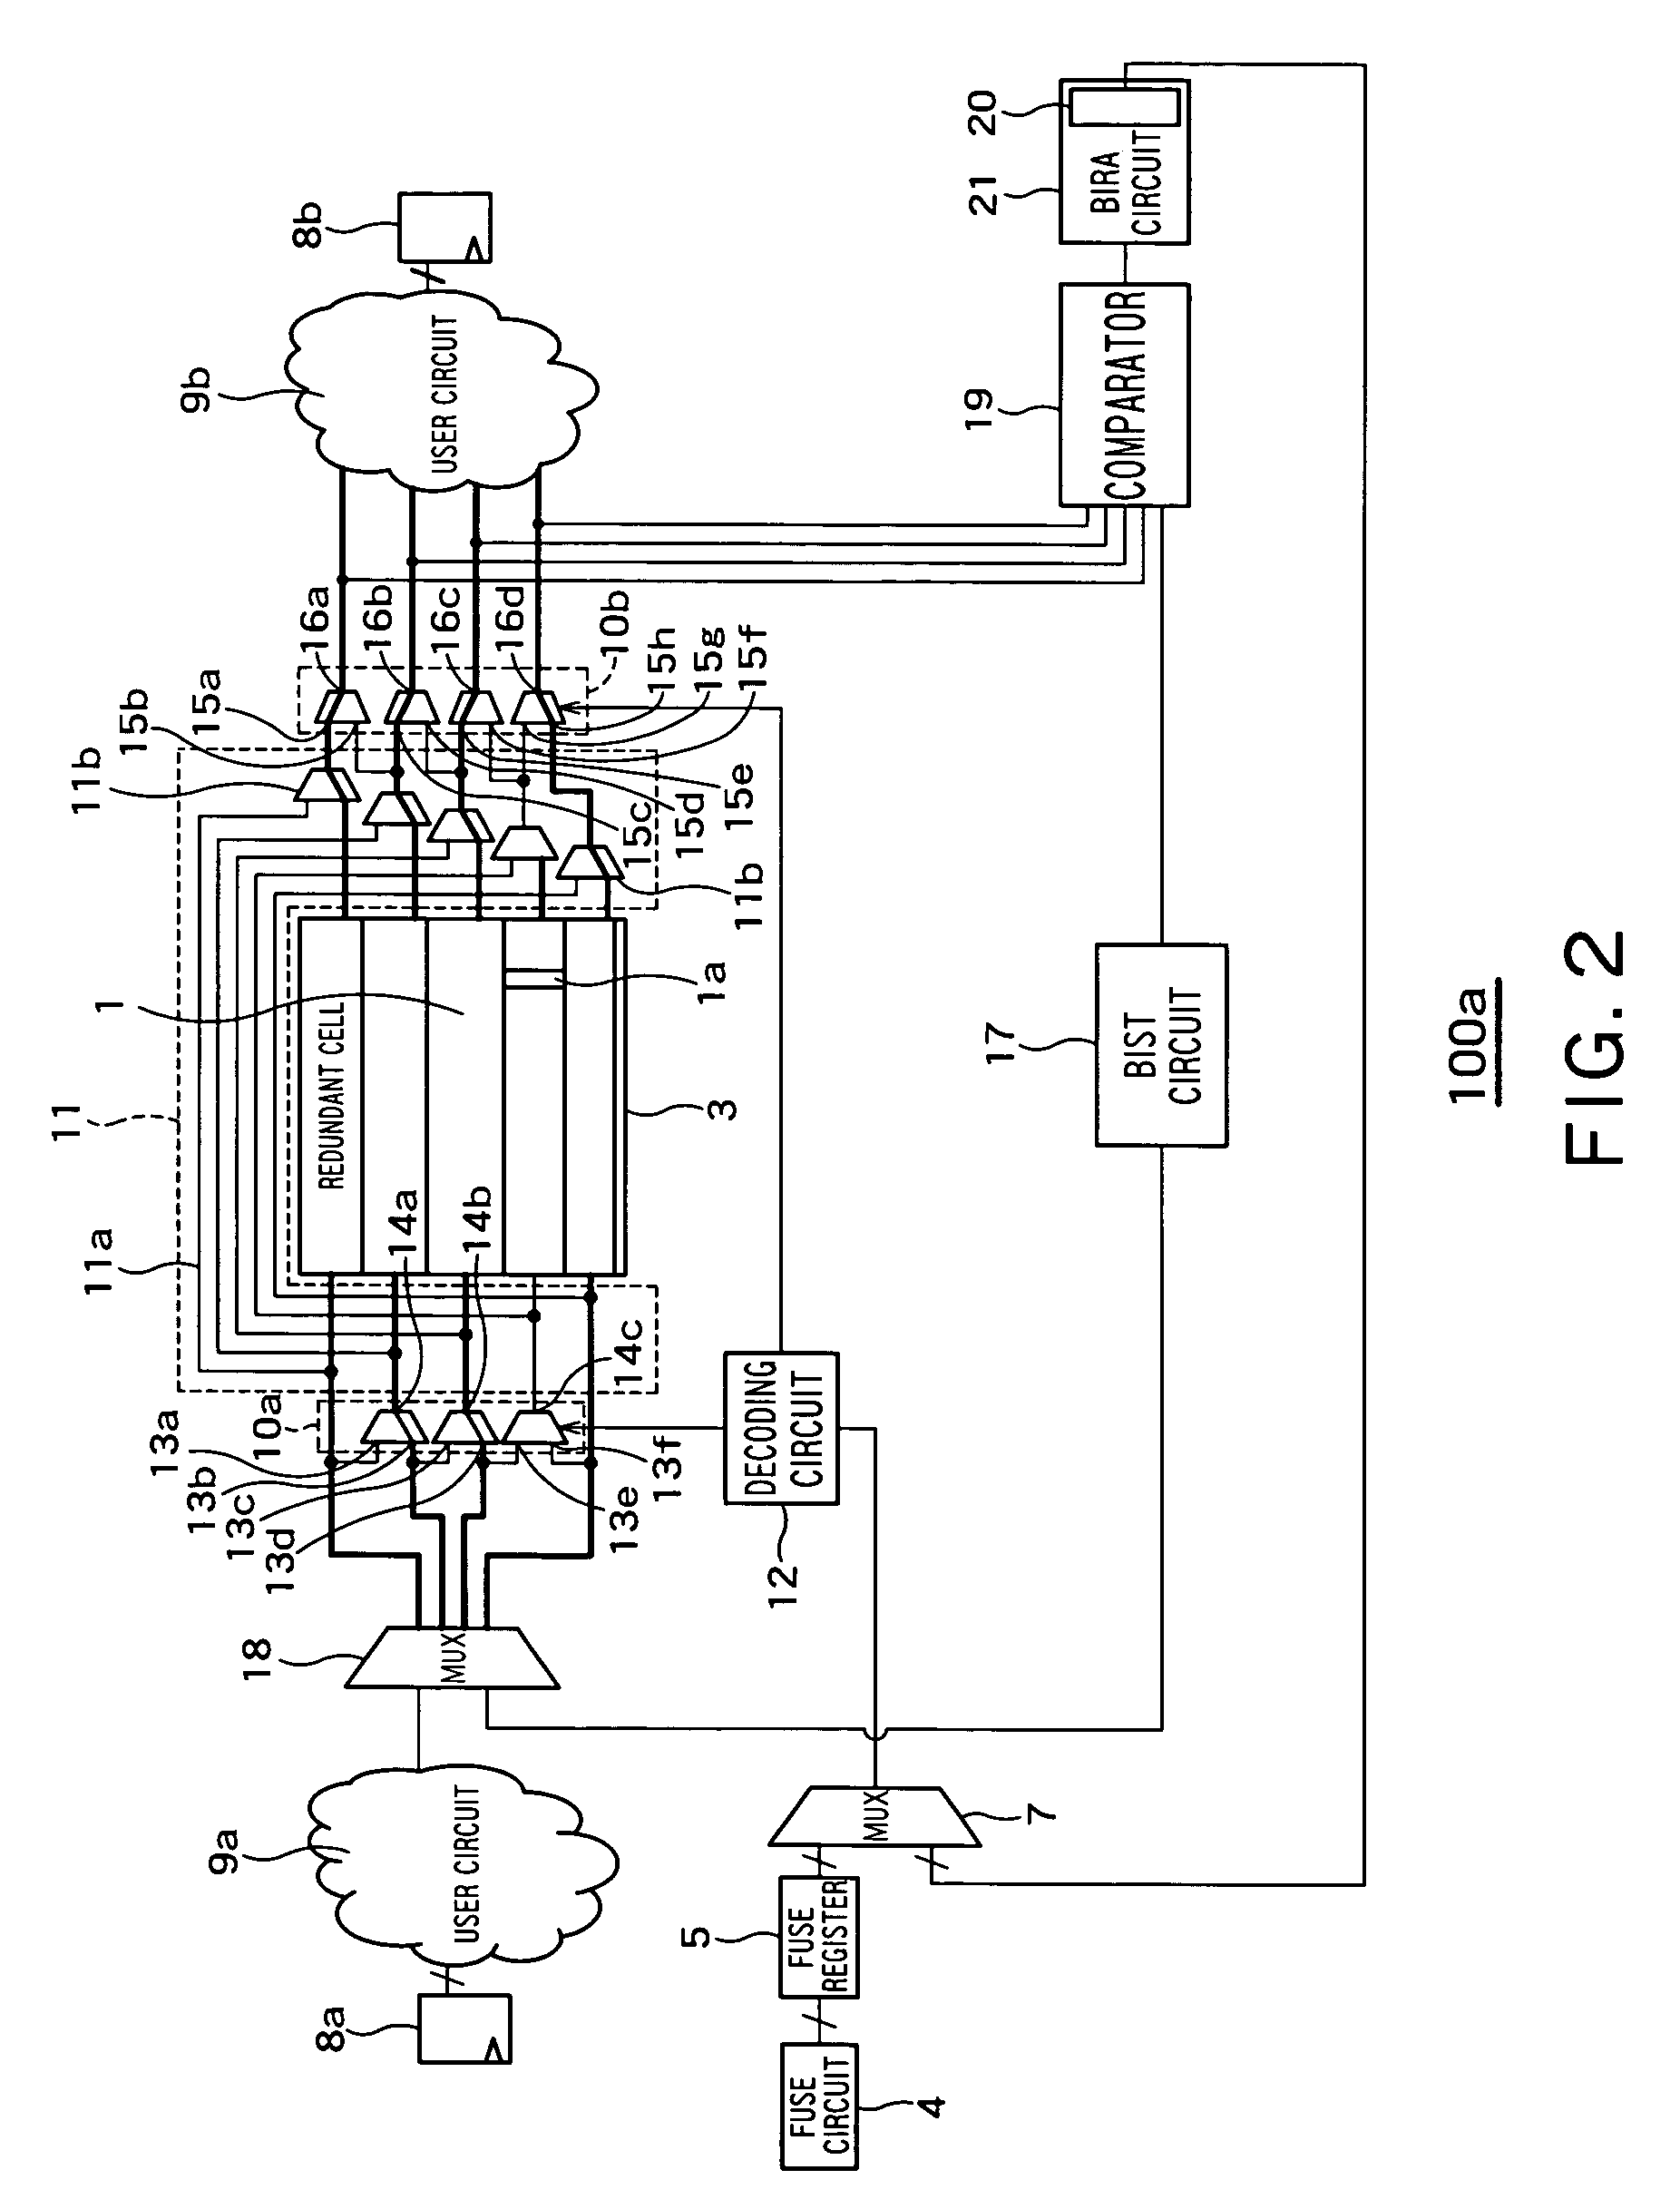 Semiconductor integrated circuit, design support software system and automatic test pattern generation system